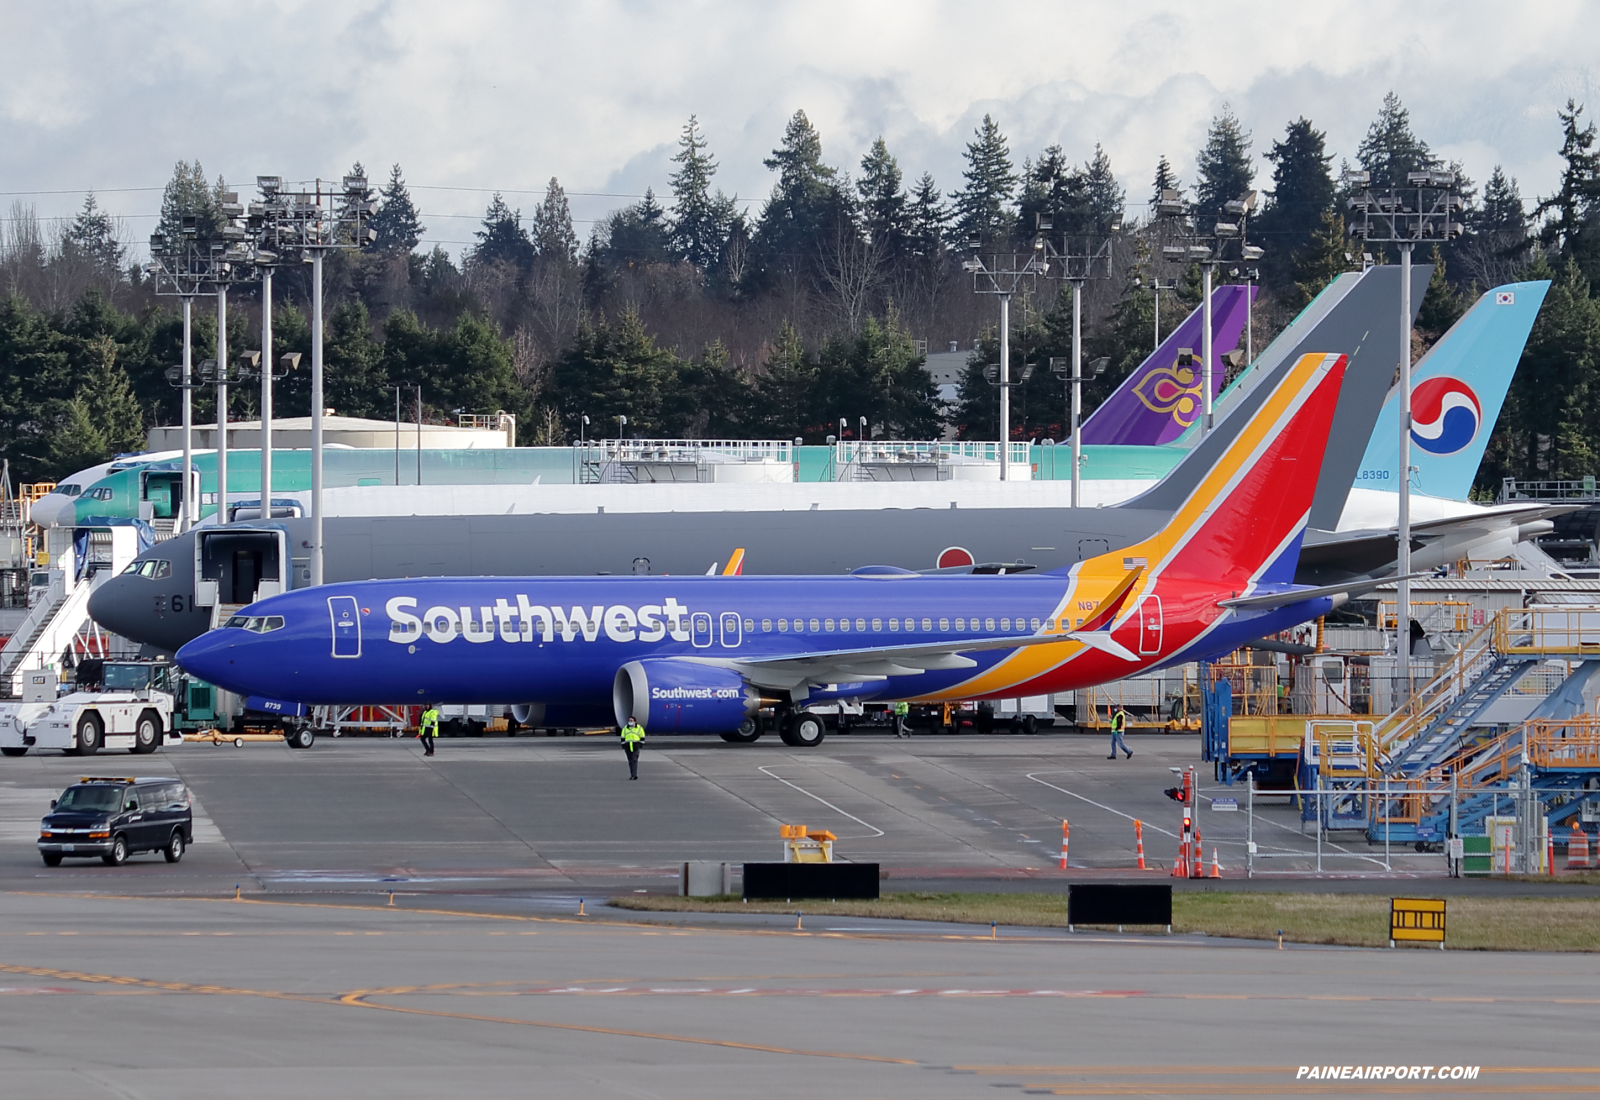 Southwest Airlines 737 N8739L at KPAE Paine Field